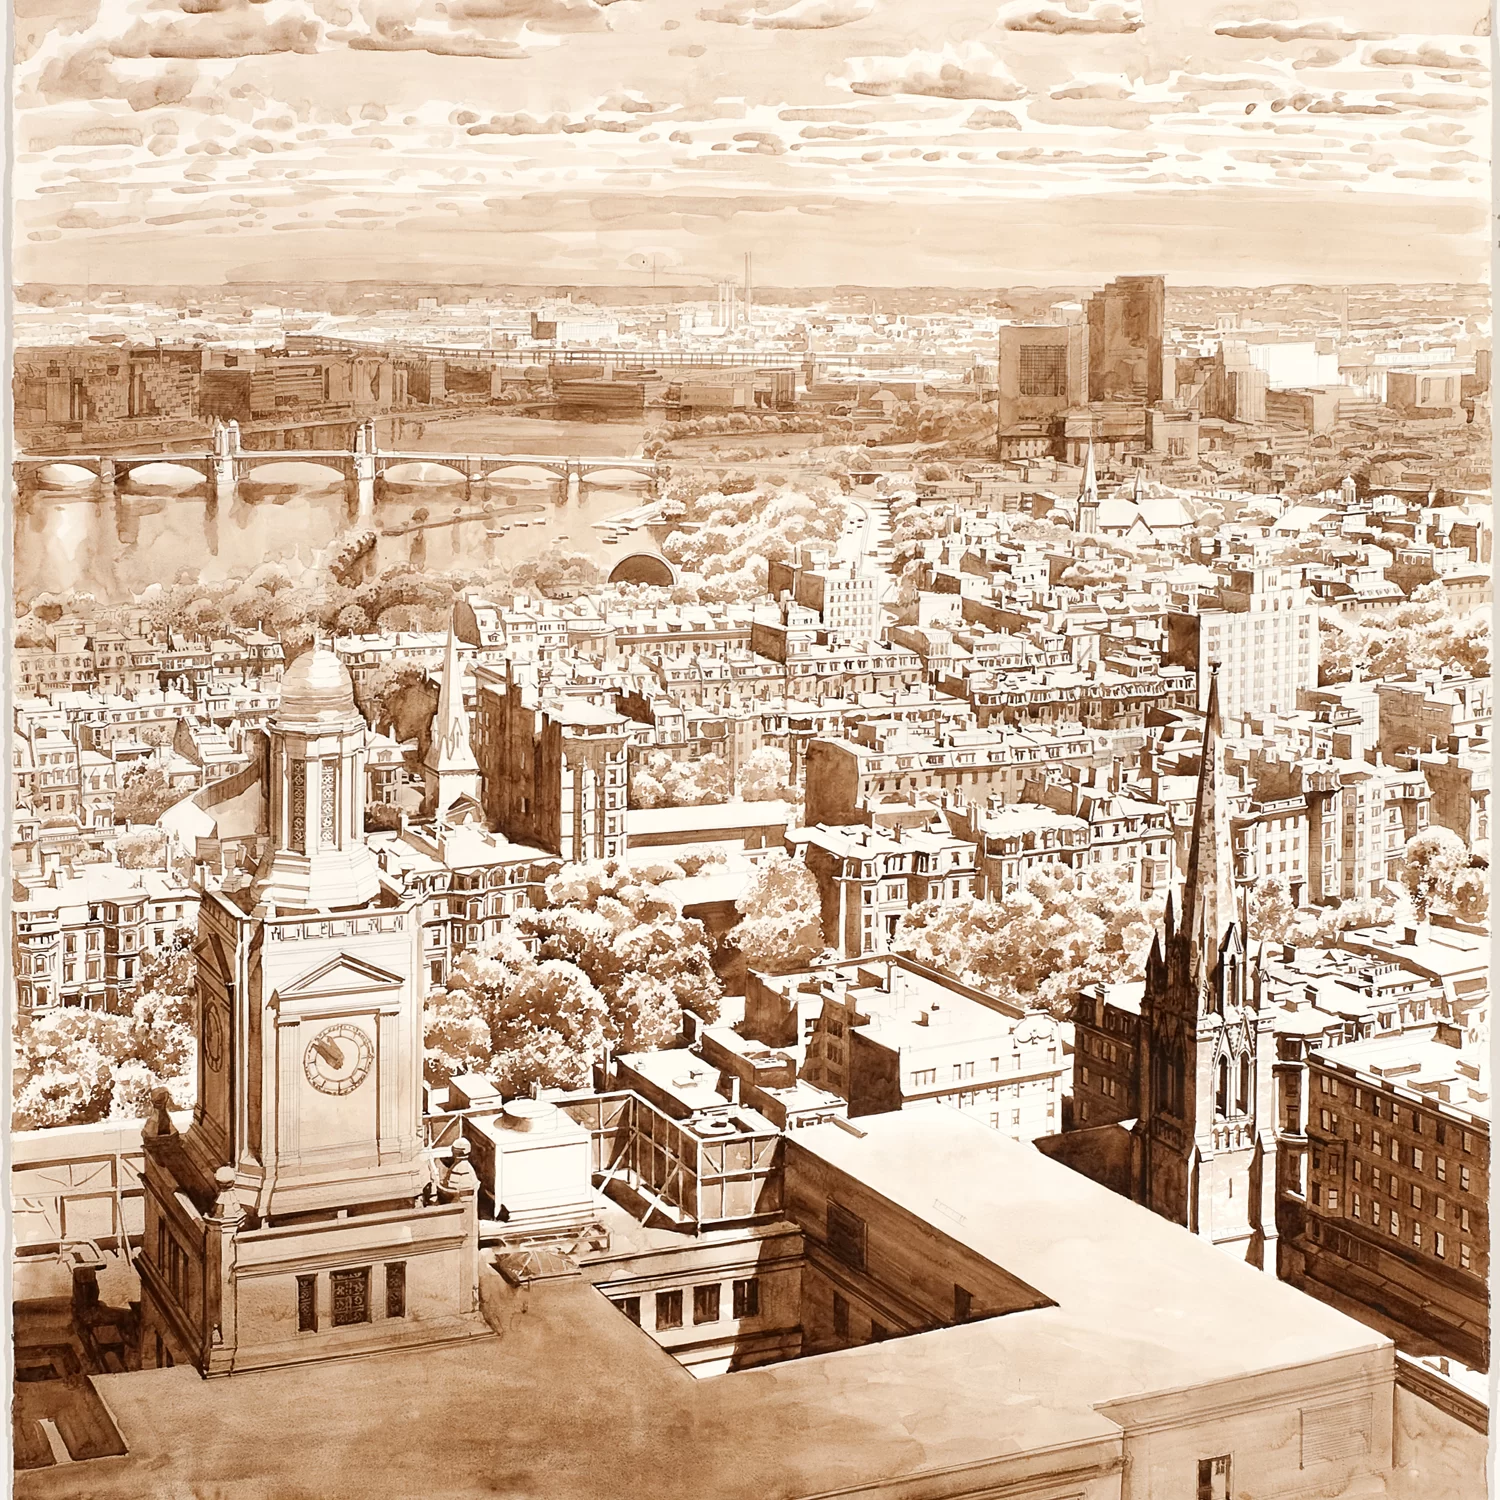 Joel Babb, Study for New England Towers, 2001, graphite, ink and wash, Museum purchase with the Robert A. and Minna F. Johnson Art Acquisition Fund, 2009.12.1